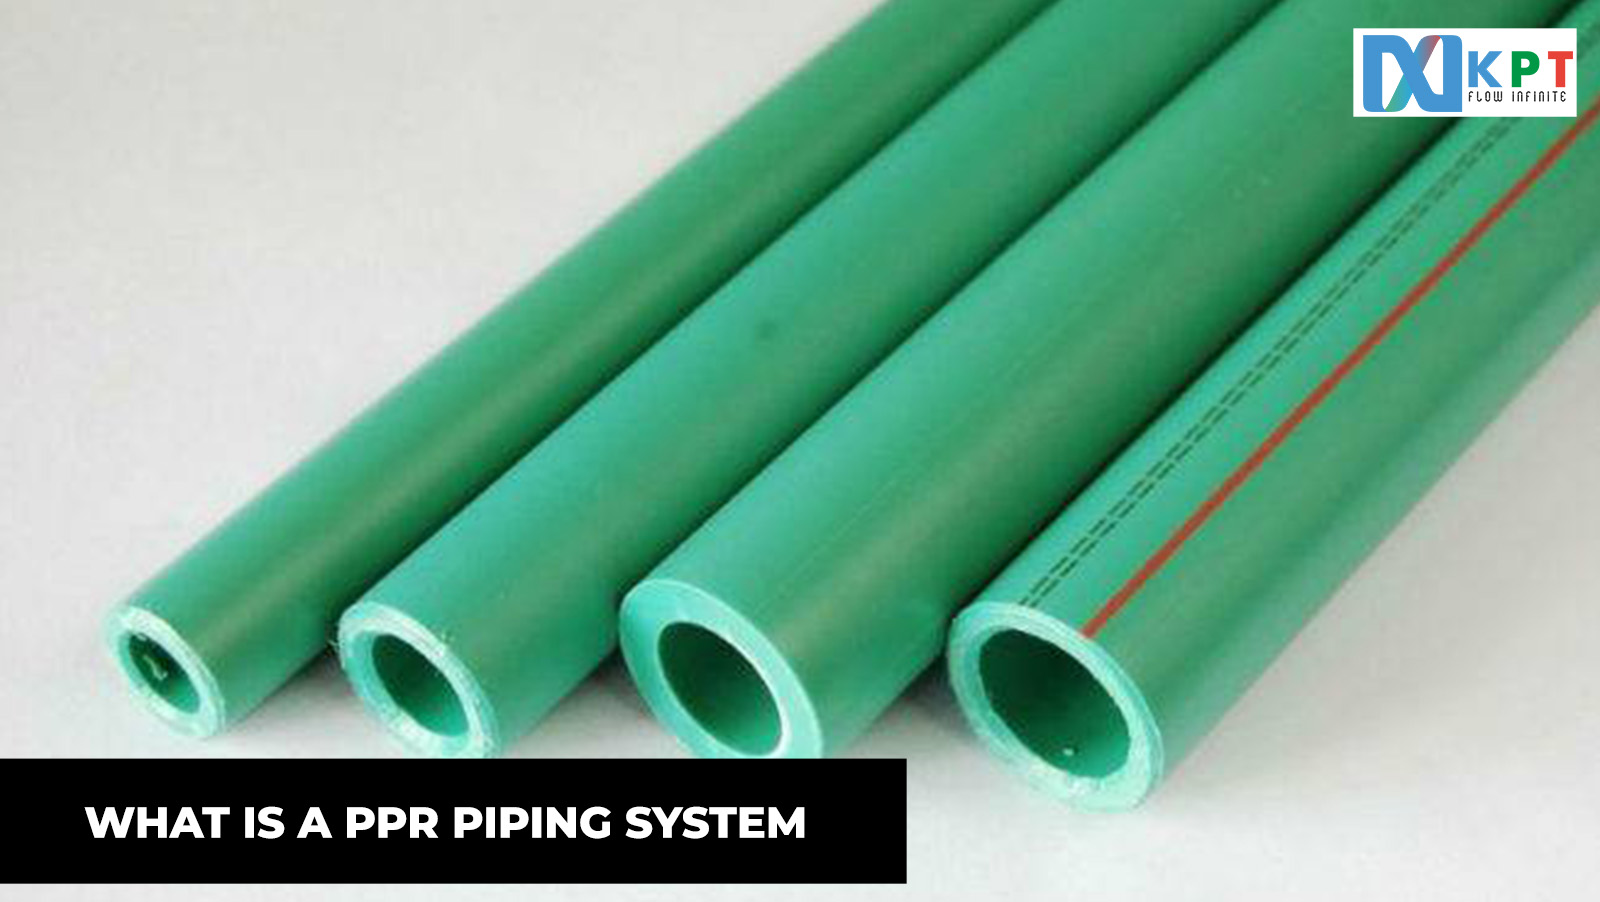 What is a PPR piping system